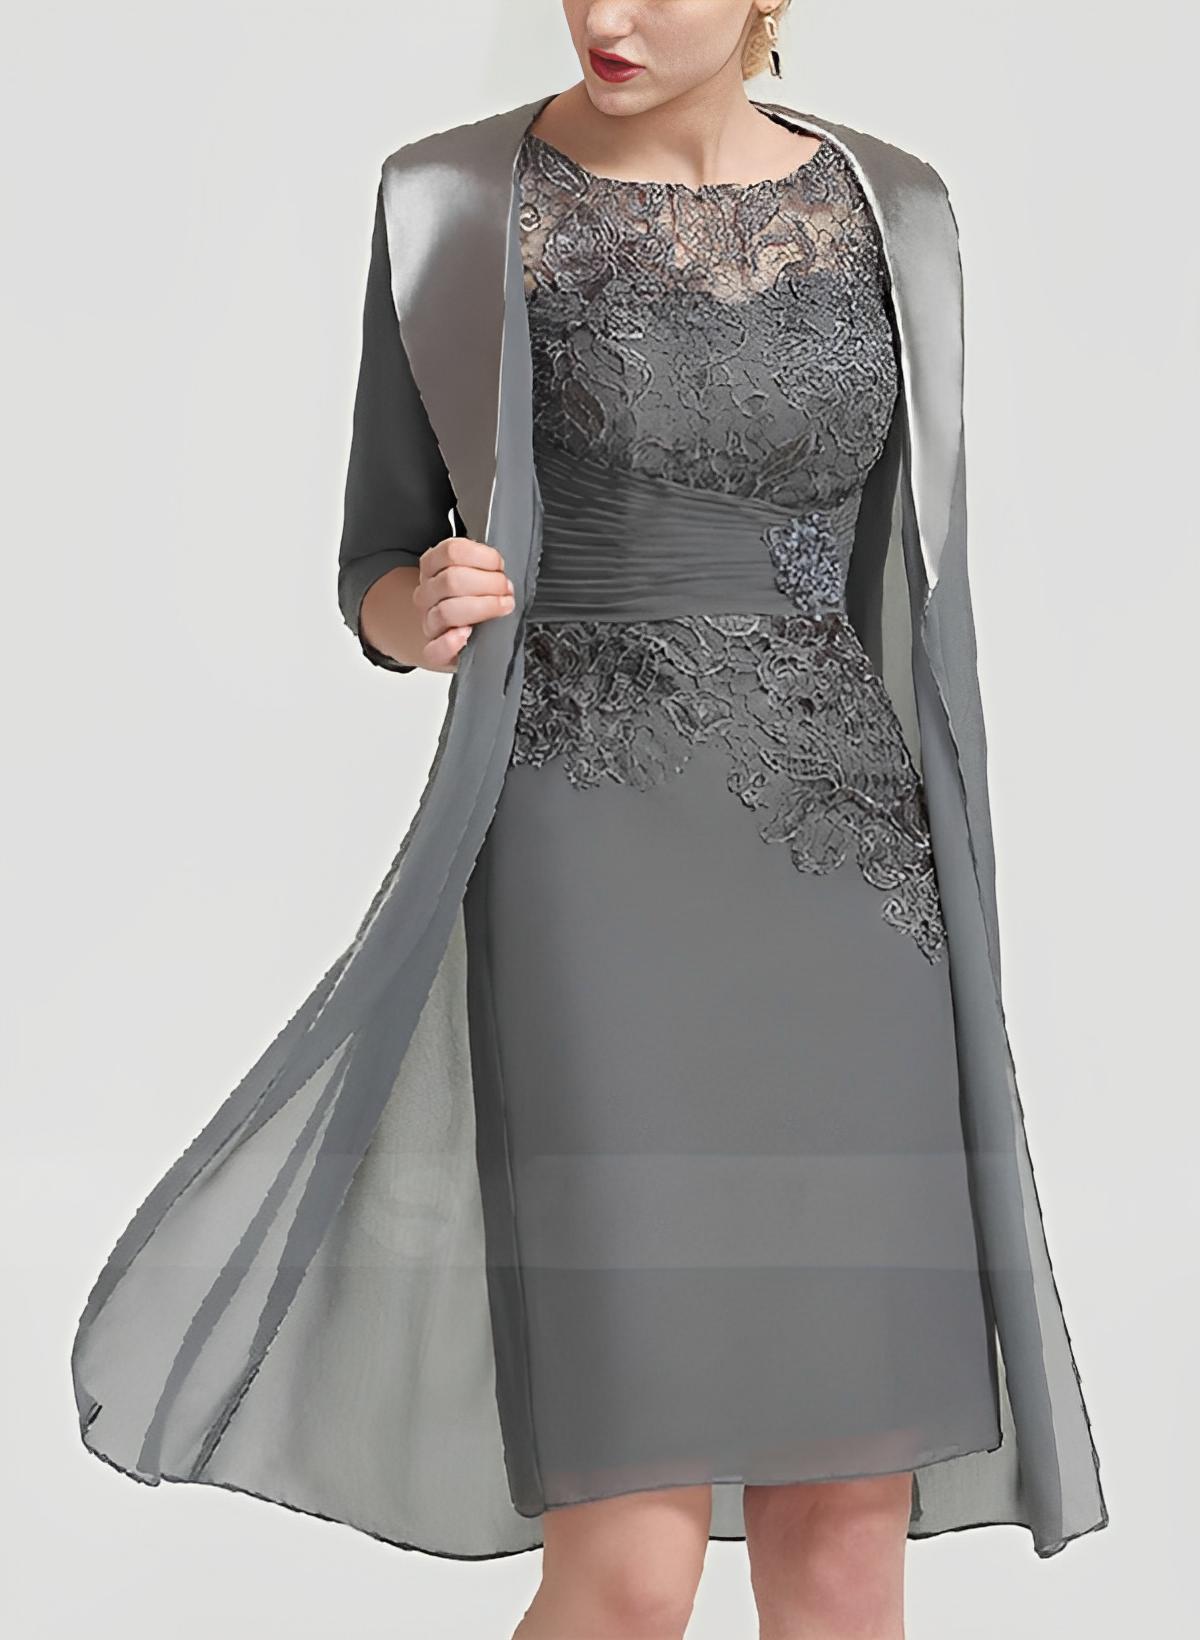 Sheath/Column 1/2 Sleeves Scoop Neck Chiffon Lace Mother Of The Bride Dresses